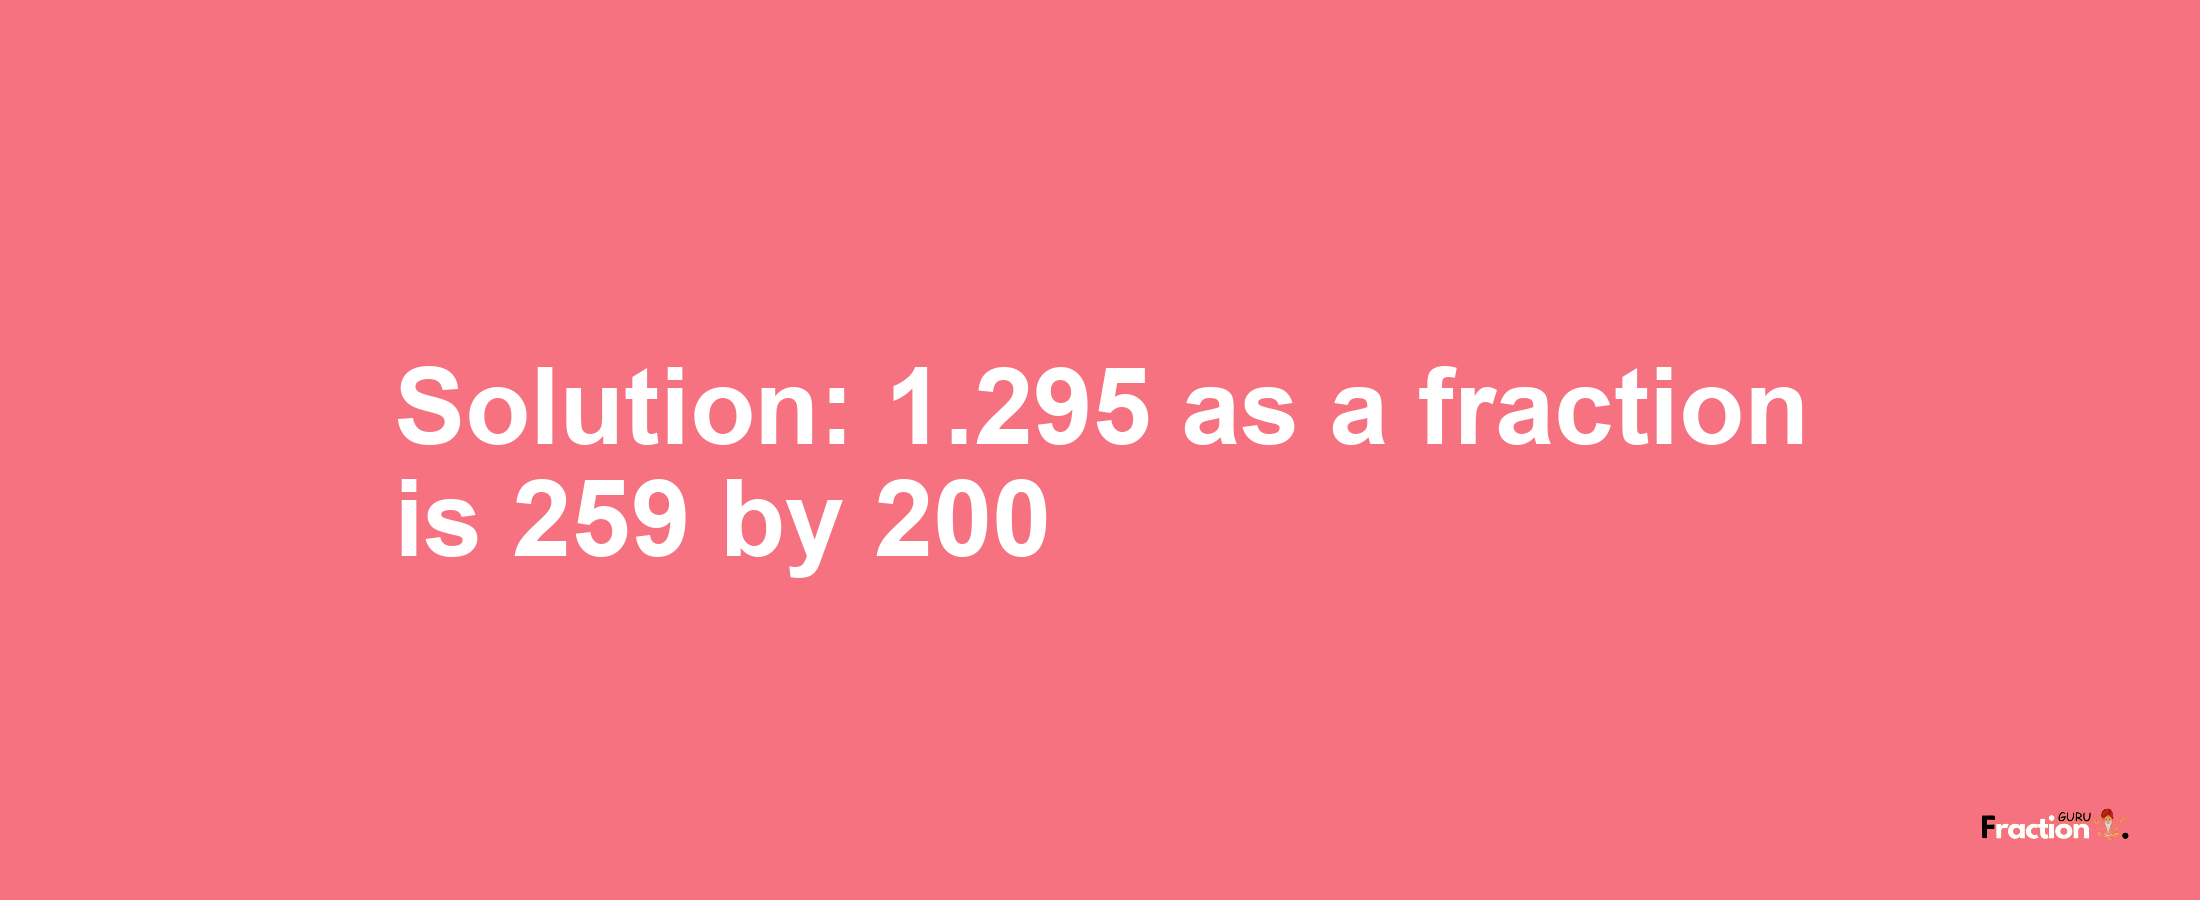 Solution:1.295 as a fraction is 259/200